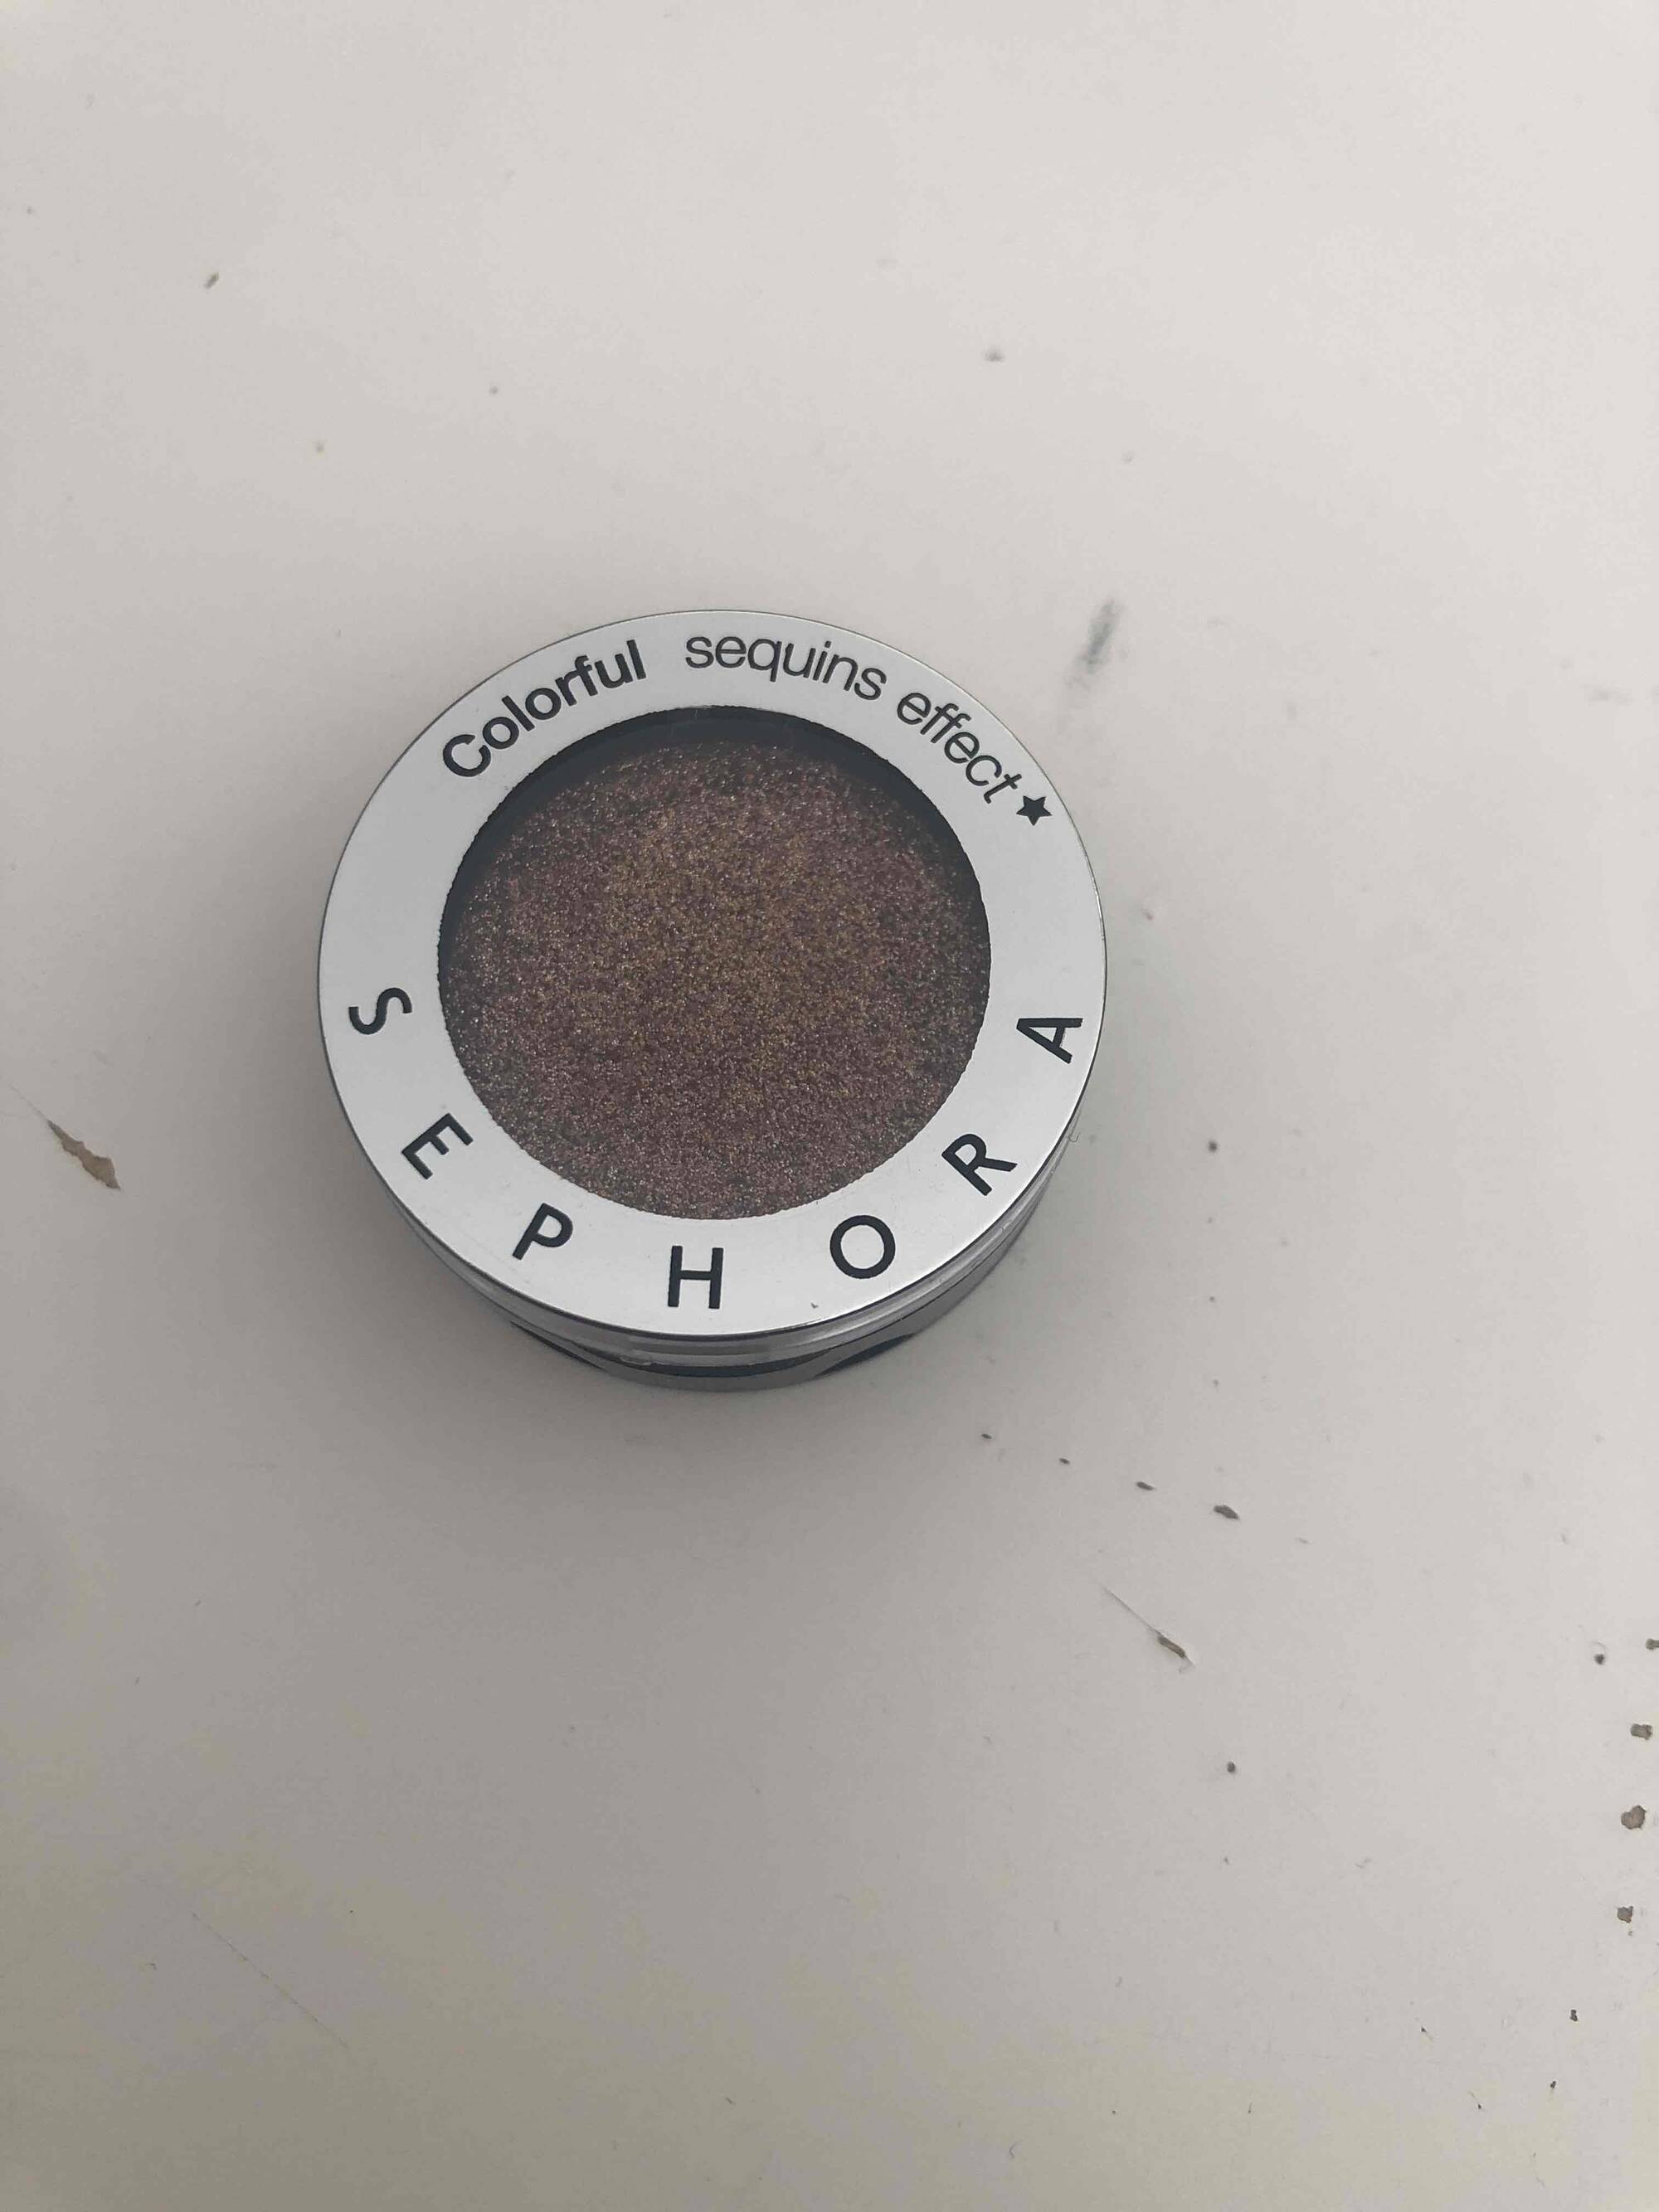 SEPHORA - Colorful sequins effect 